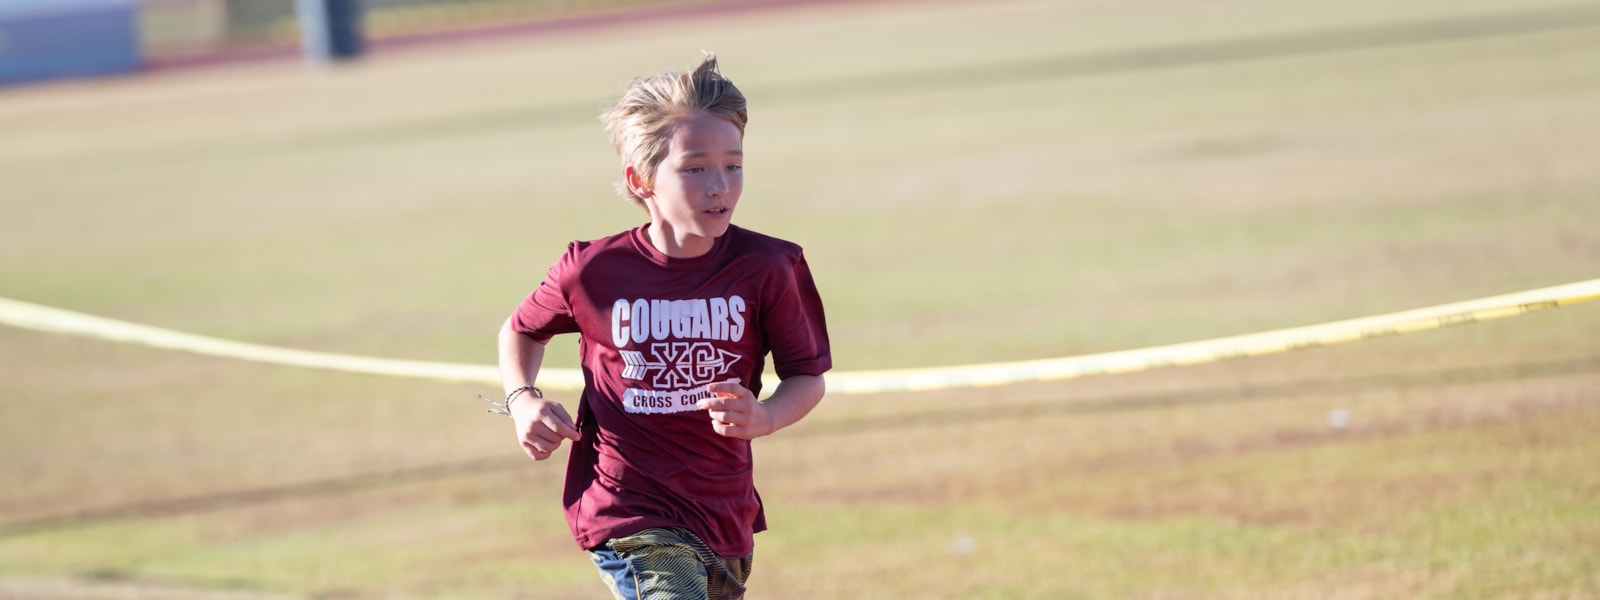 Student running in cross country race.